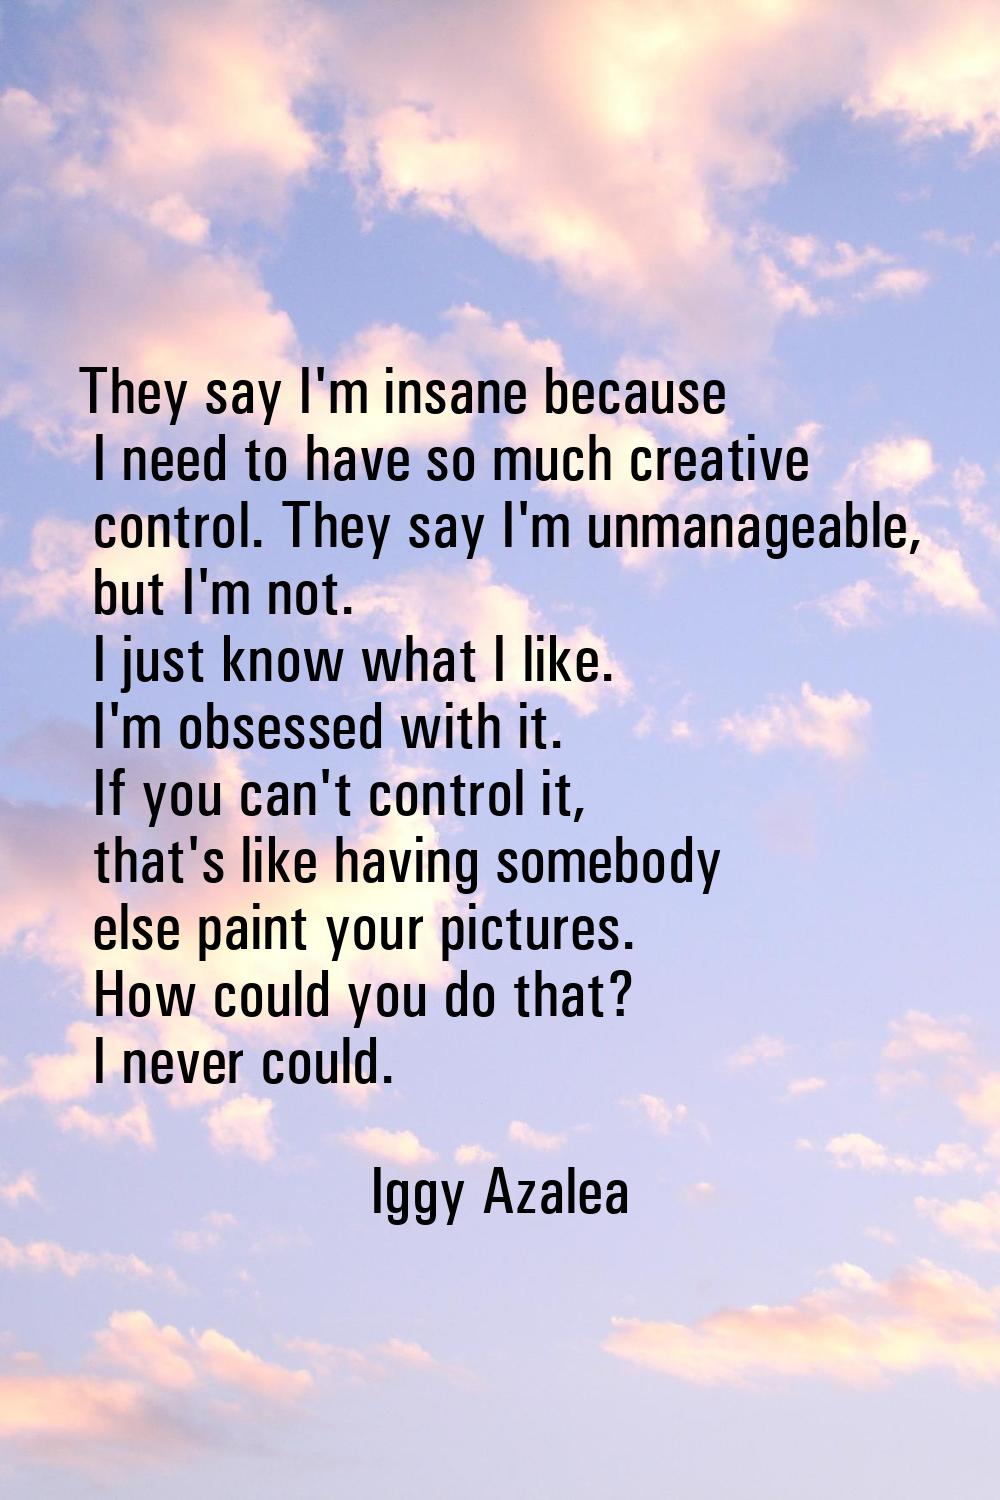 They say I'm insane because I need to have so much creative control. They say I'm unmanageable, but